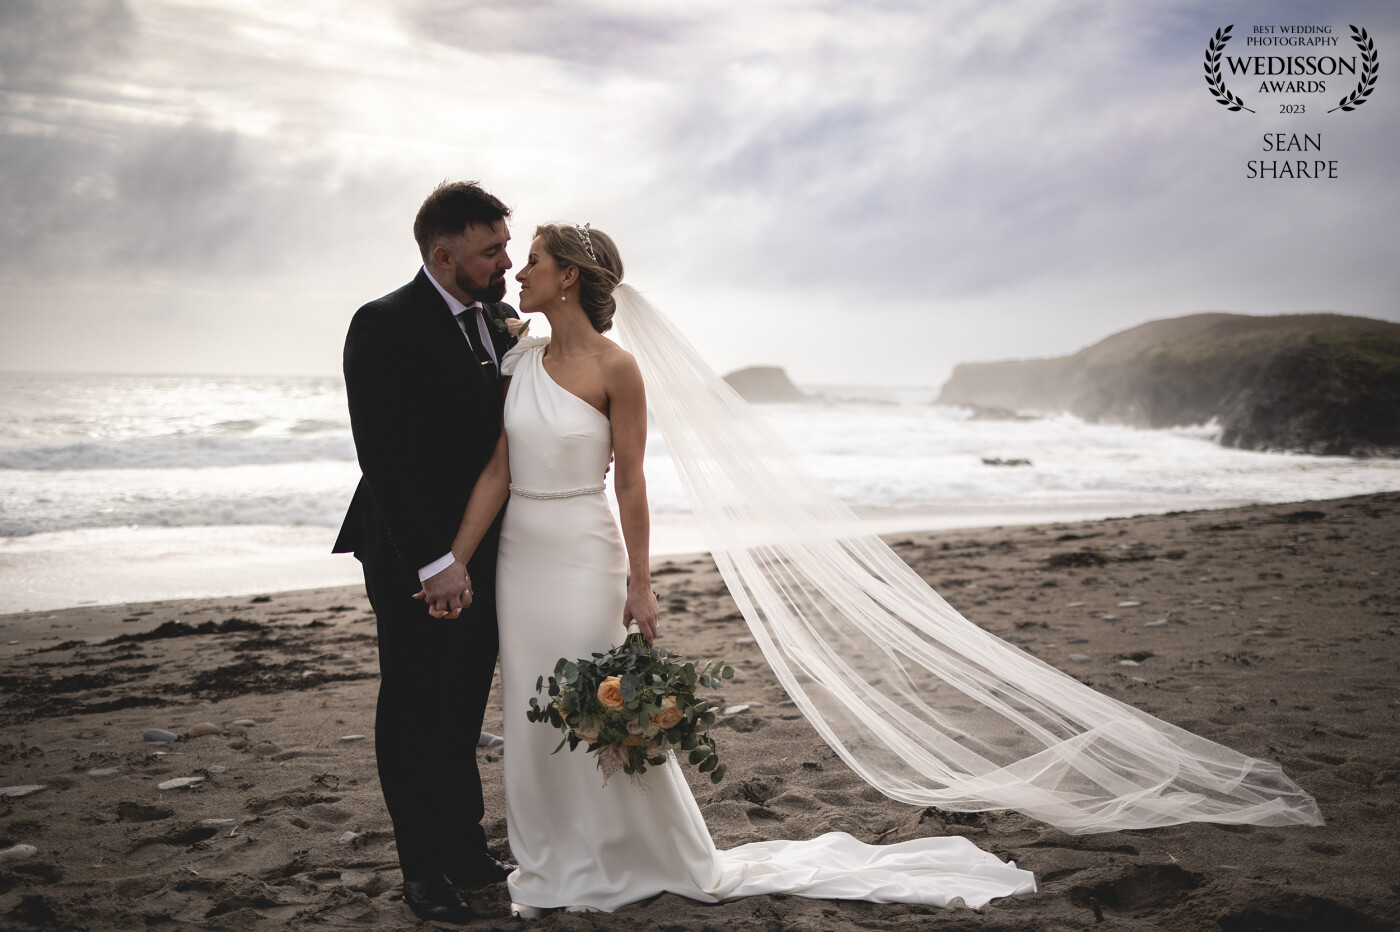 Elaine and Adam at a beautiful West Cork beach near Clonakilty. The light, the scene, the couple! It was an amazing shoot! So lucky with the weather that day!